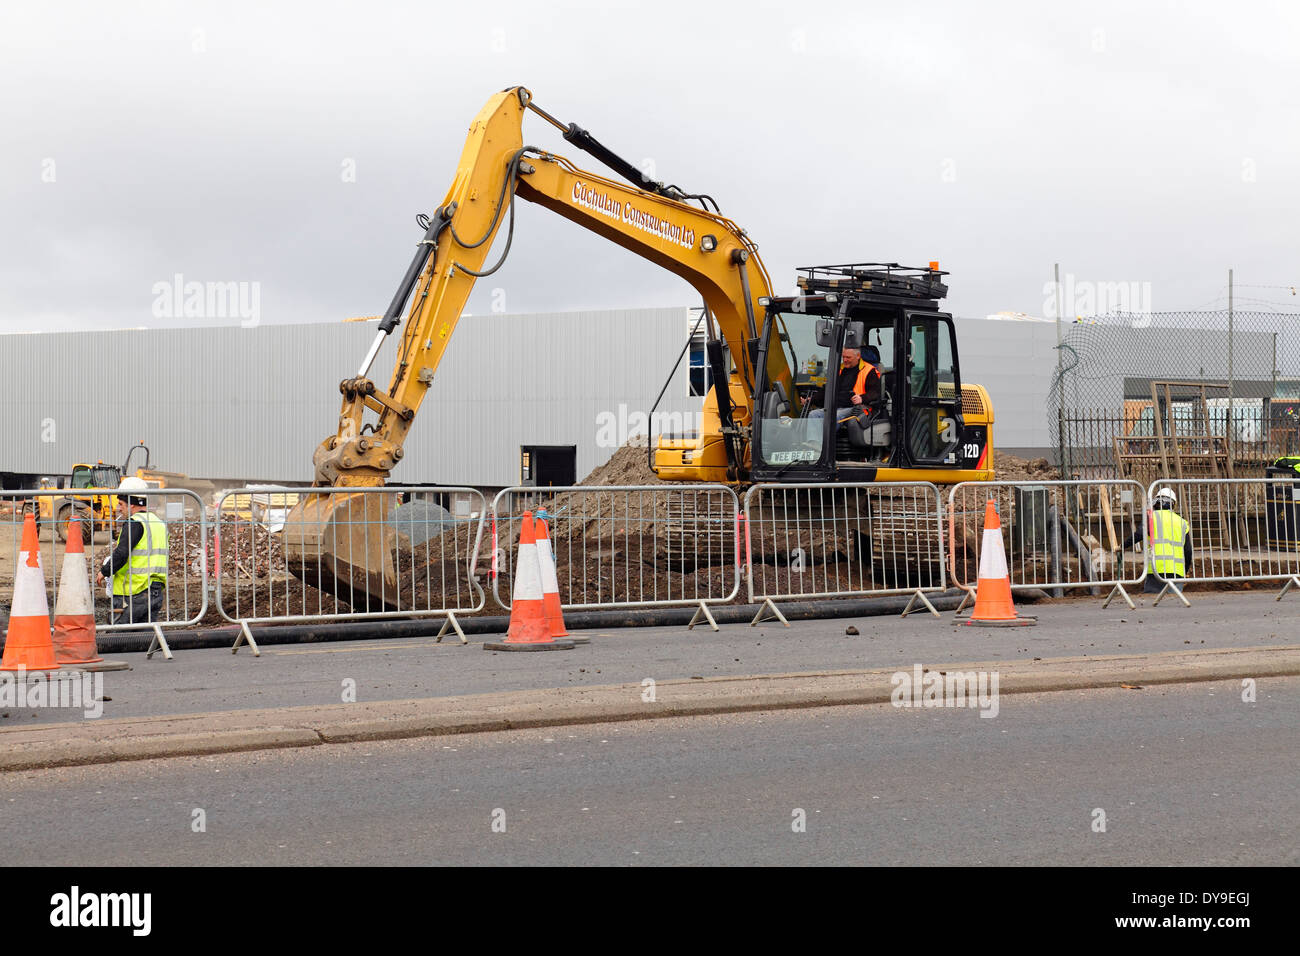 A mechanical digger excavating earth on a construction site in Scotland, UK Stock Photo